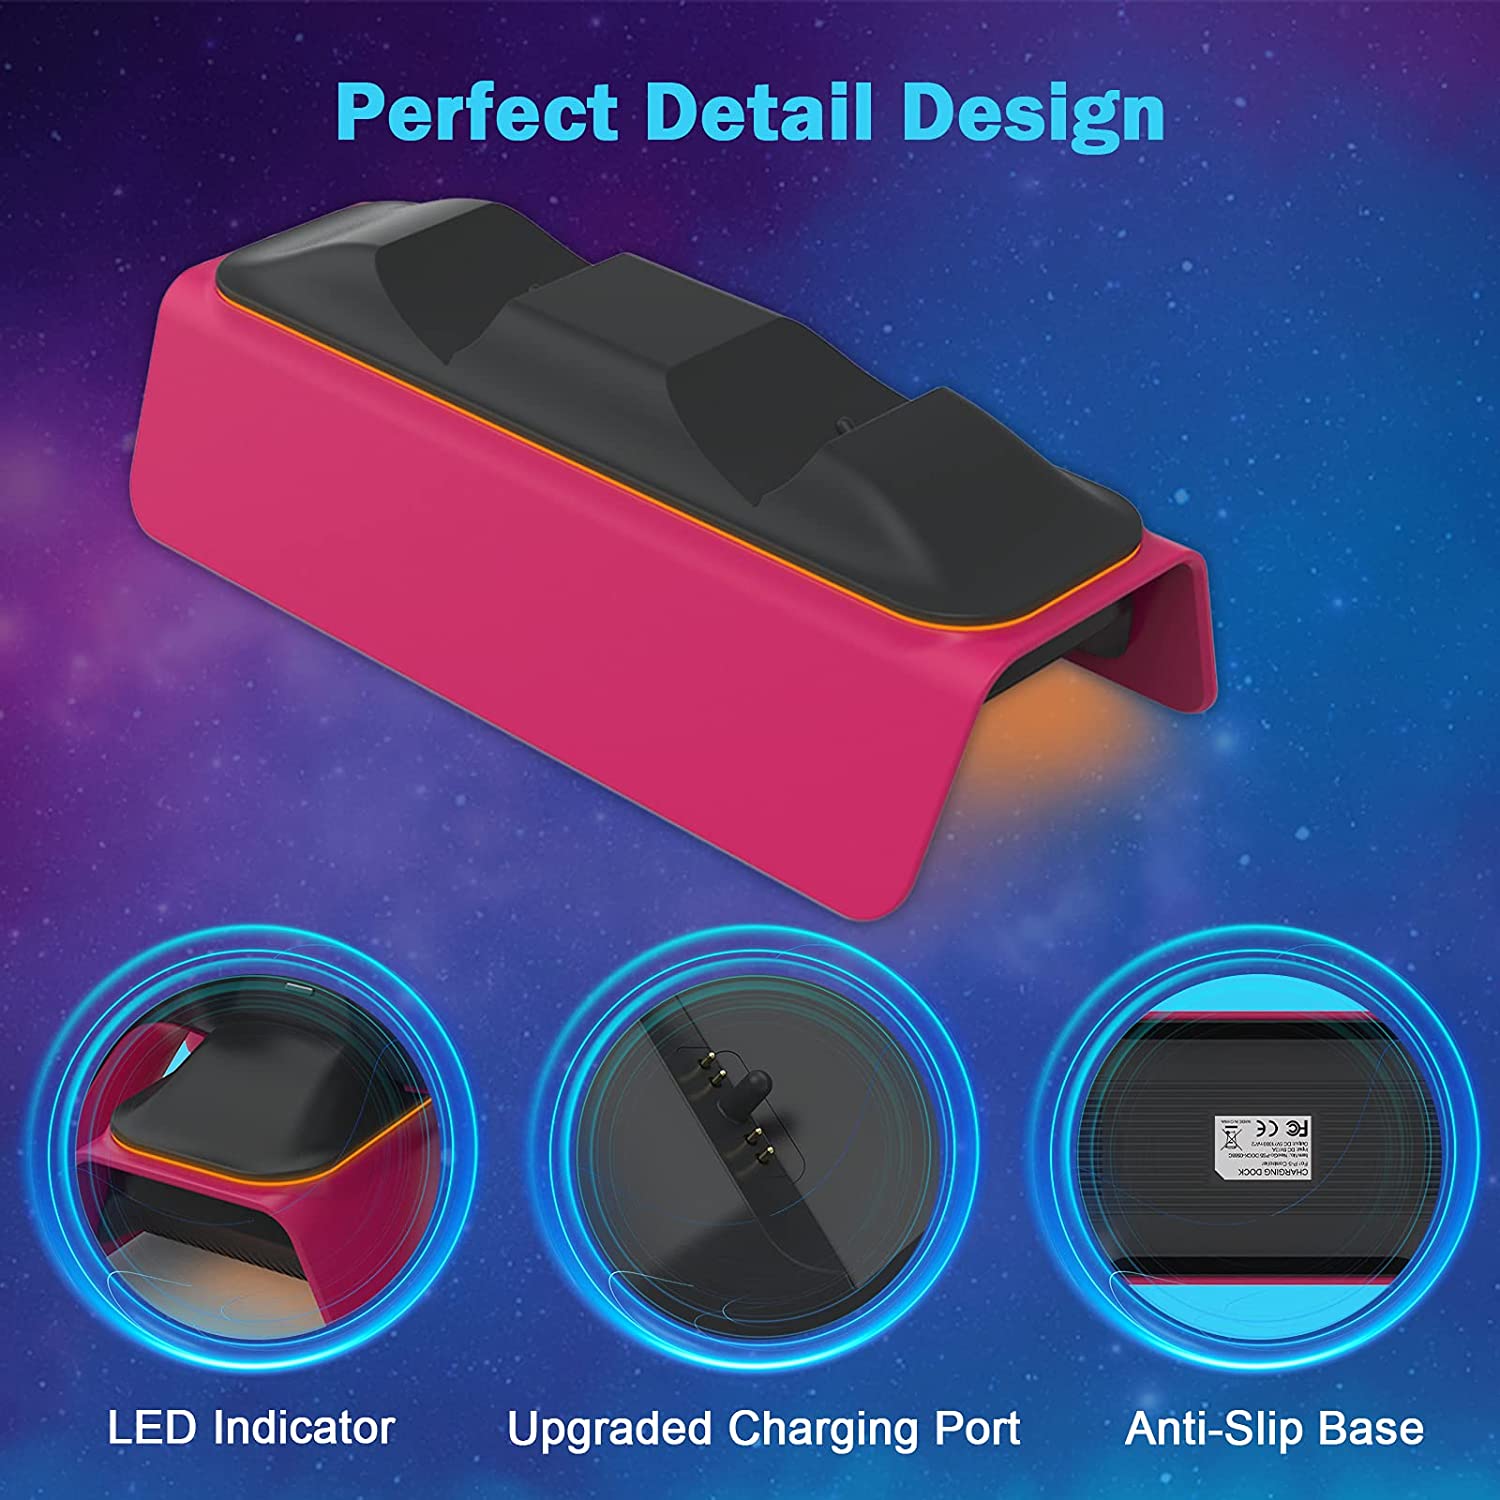 This Charging station features LED Indicator, Upgraded Charging Port, and Anti-Slip Base.